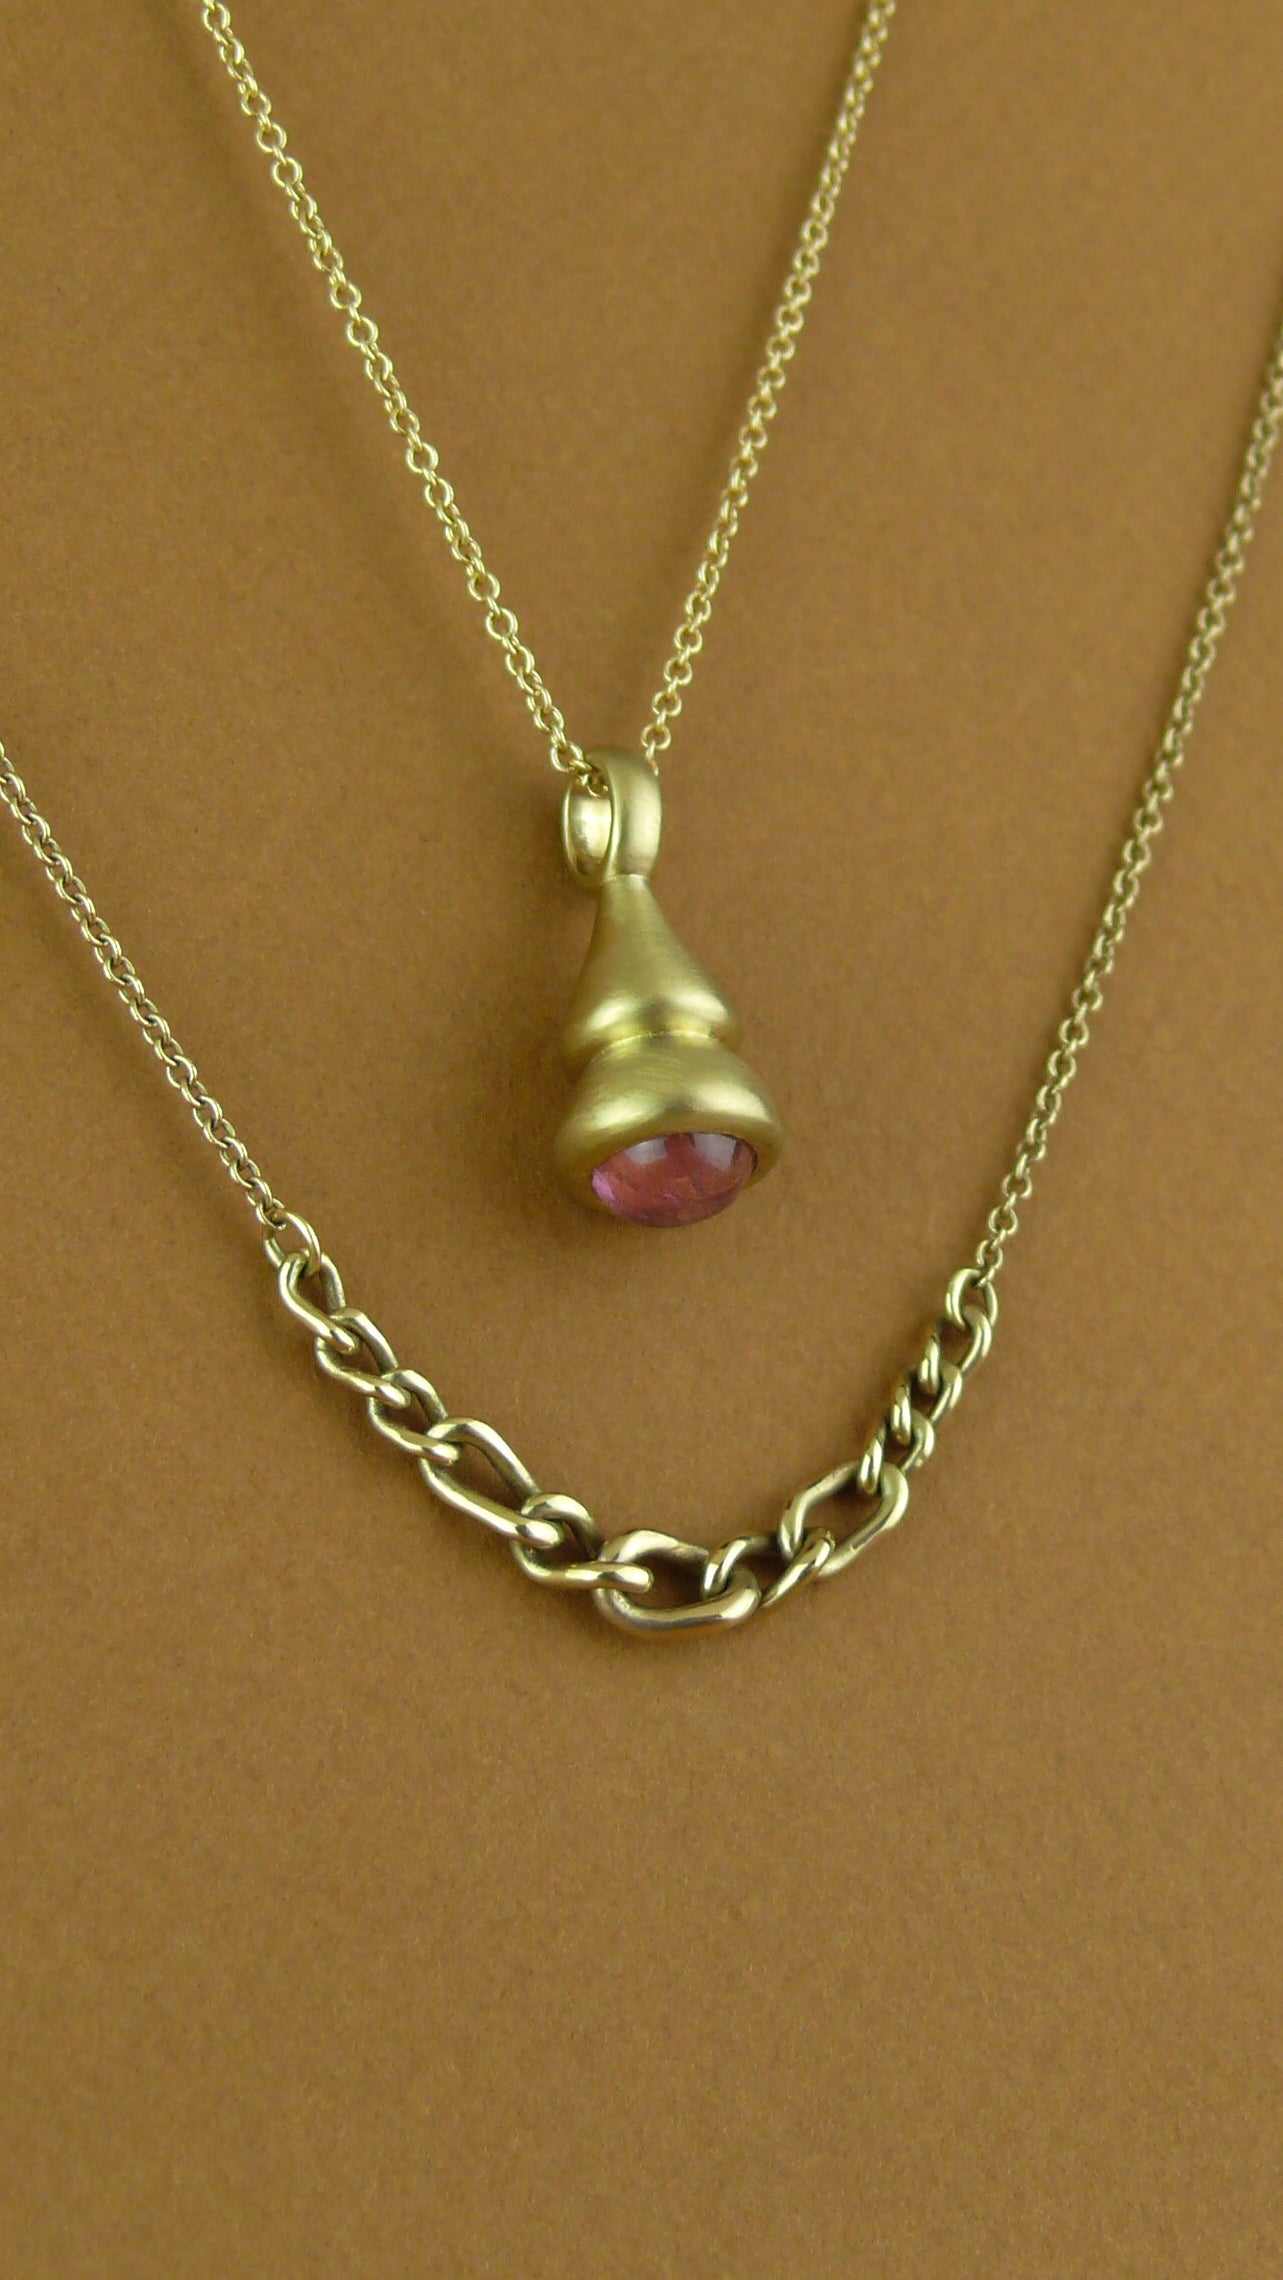 pink tourmaline pendulum charm and graduated curb chain necklace on brown paper